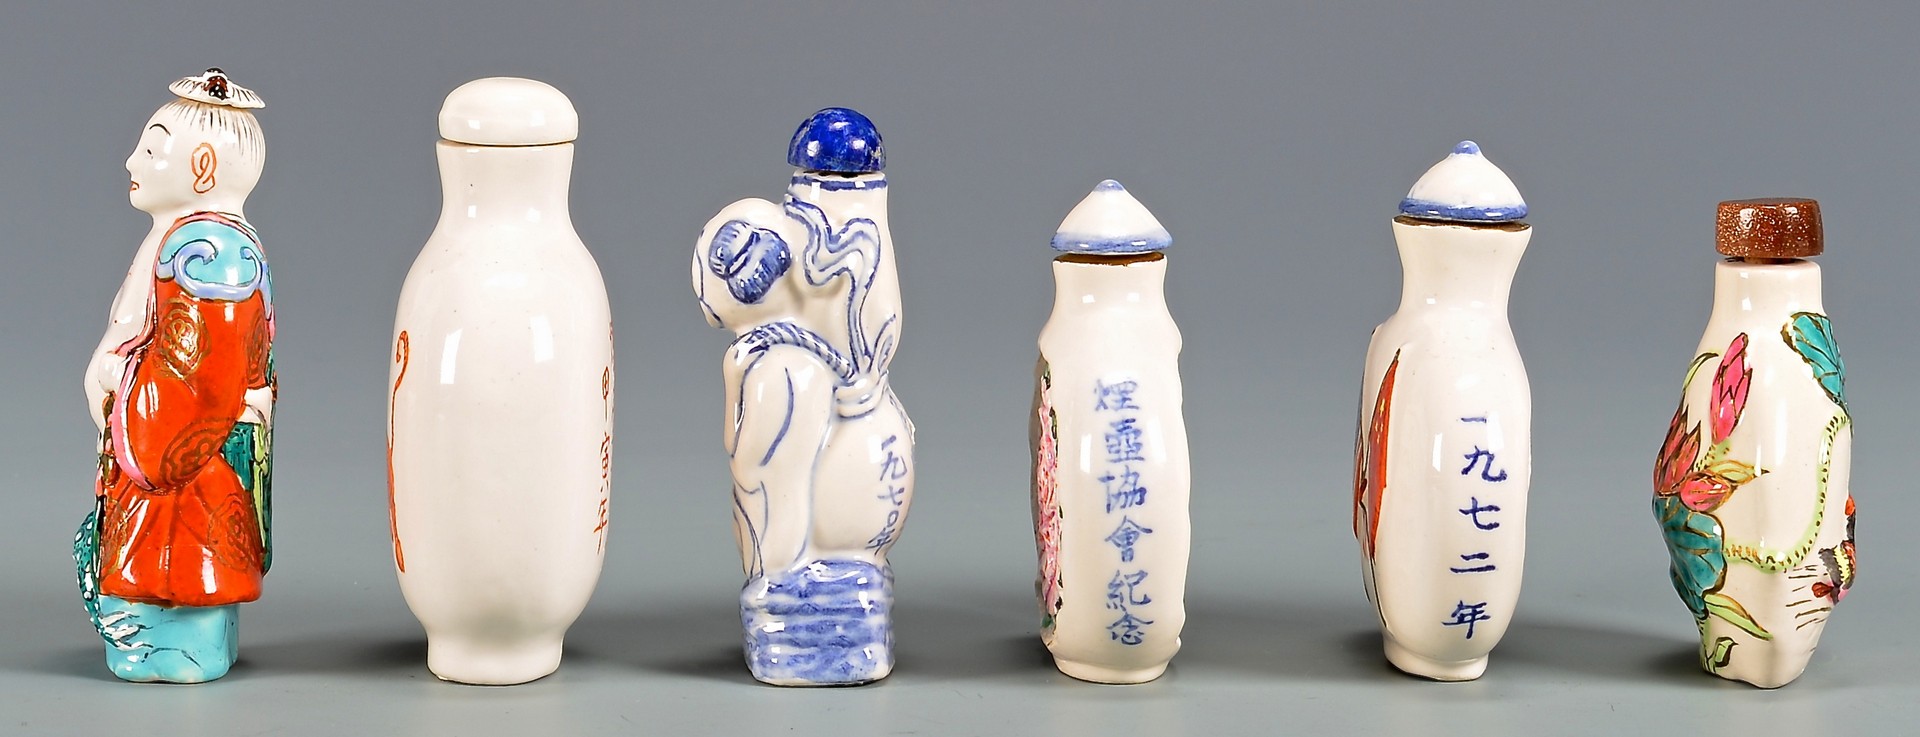 Lot 416: 6 Chinese Porcelain Snuff Bottles incl. Figurals